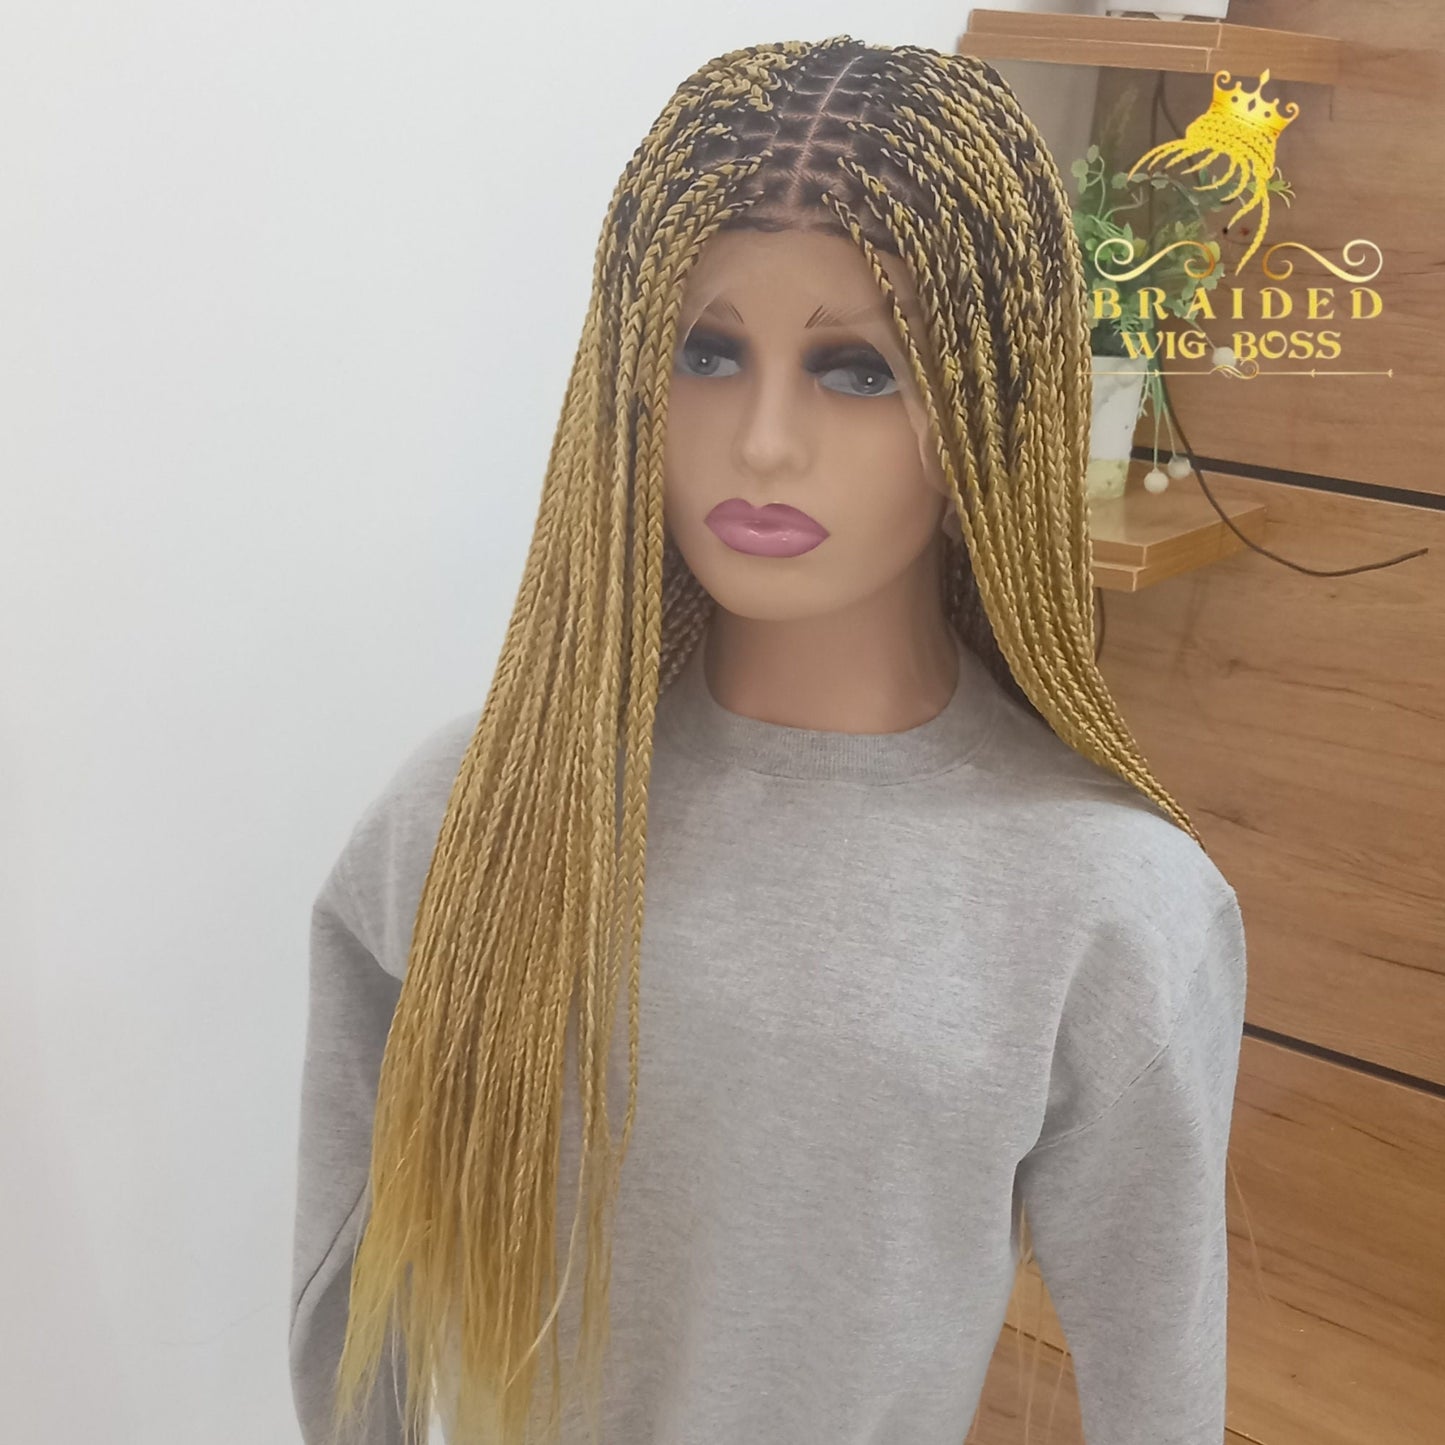 Blonde Knotless Braid Wig for Black Women, 13*6 Lace Front & Full Lace, Synthetic Heat Resistant Box Braided Wig in Various Colors/Lengths